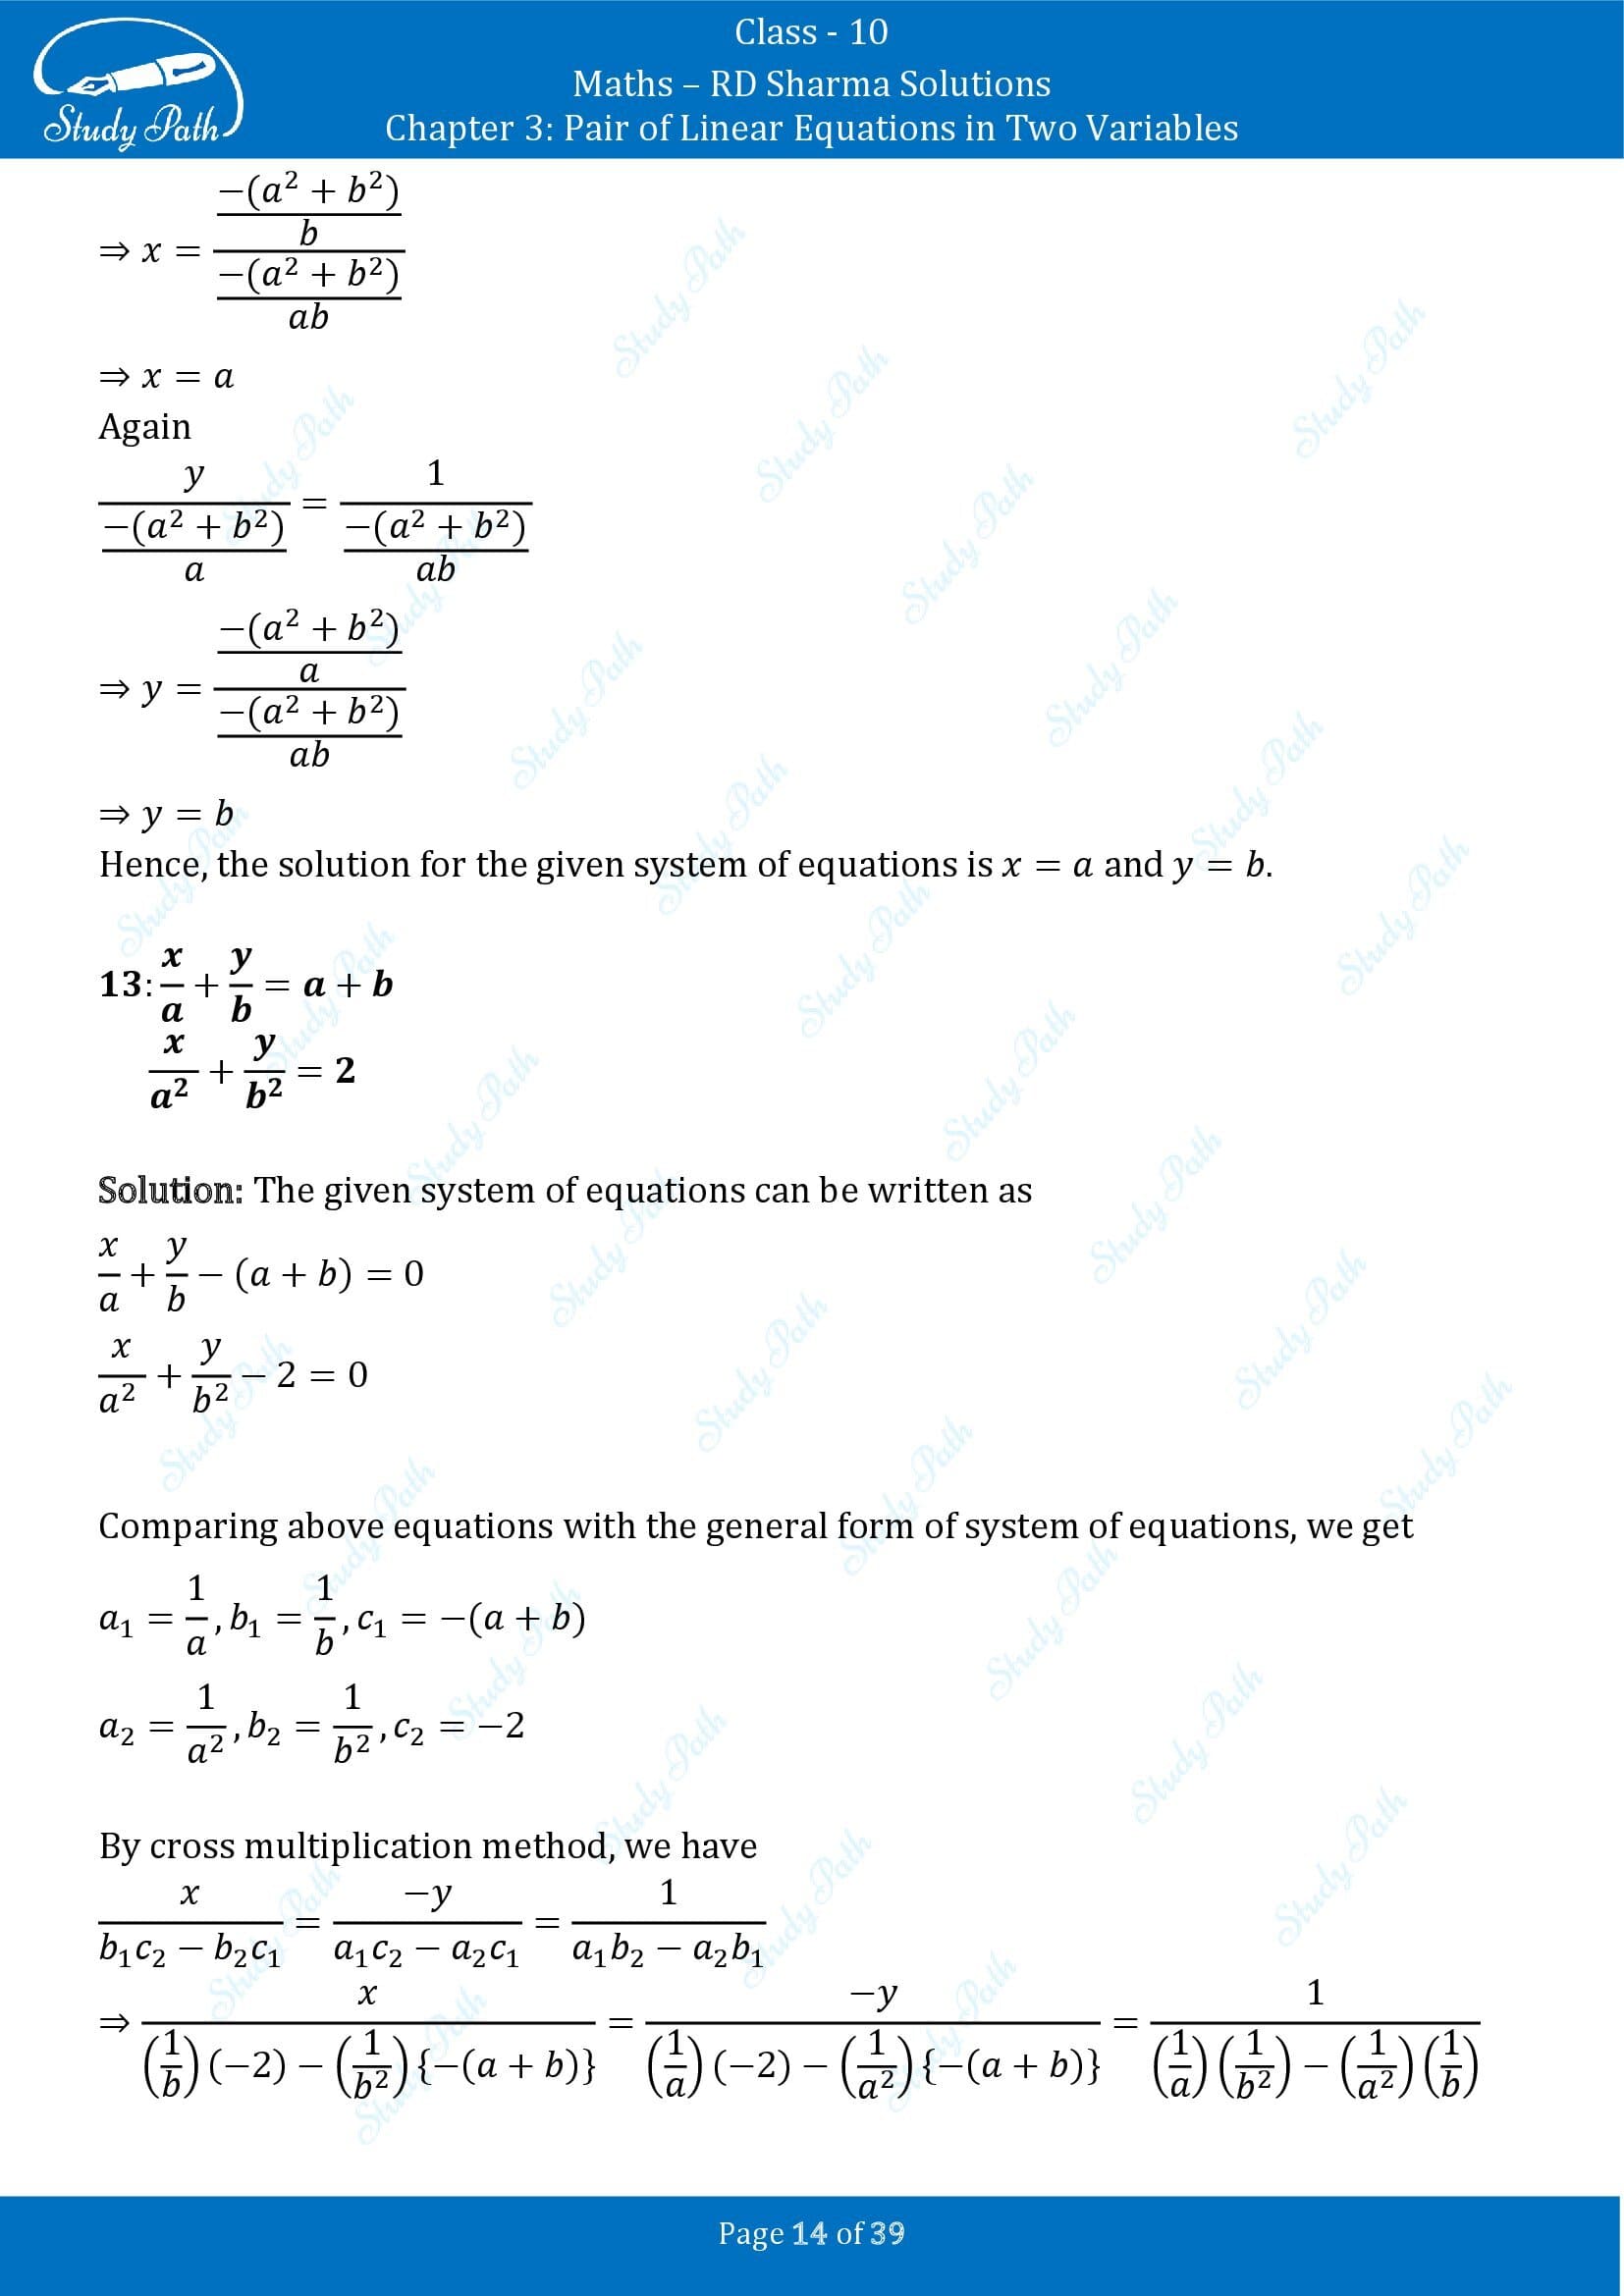 RD Sharma Solutions Class 10 Chapter 3 Pair of Linear Equations in Two Variables Exercise 3.4 00014